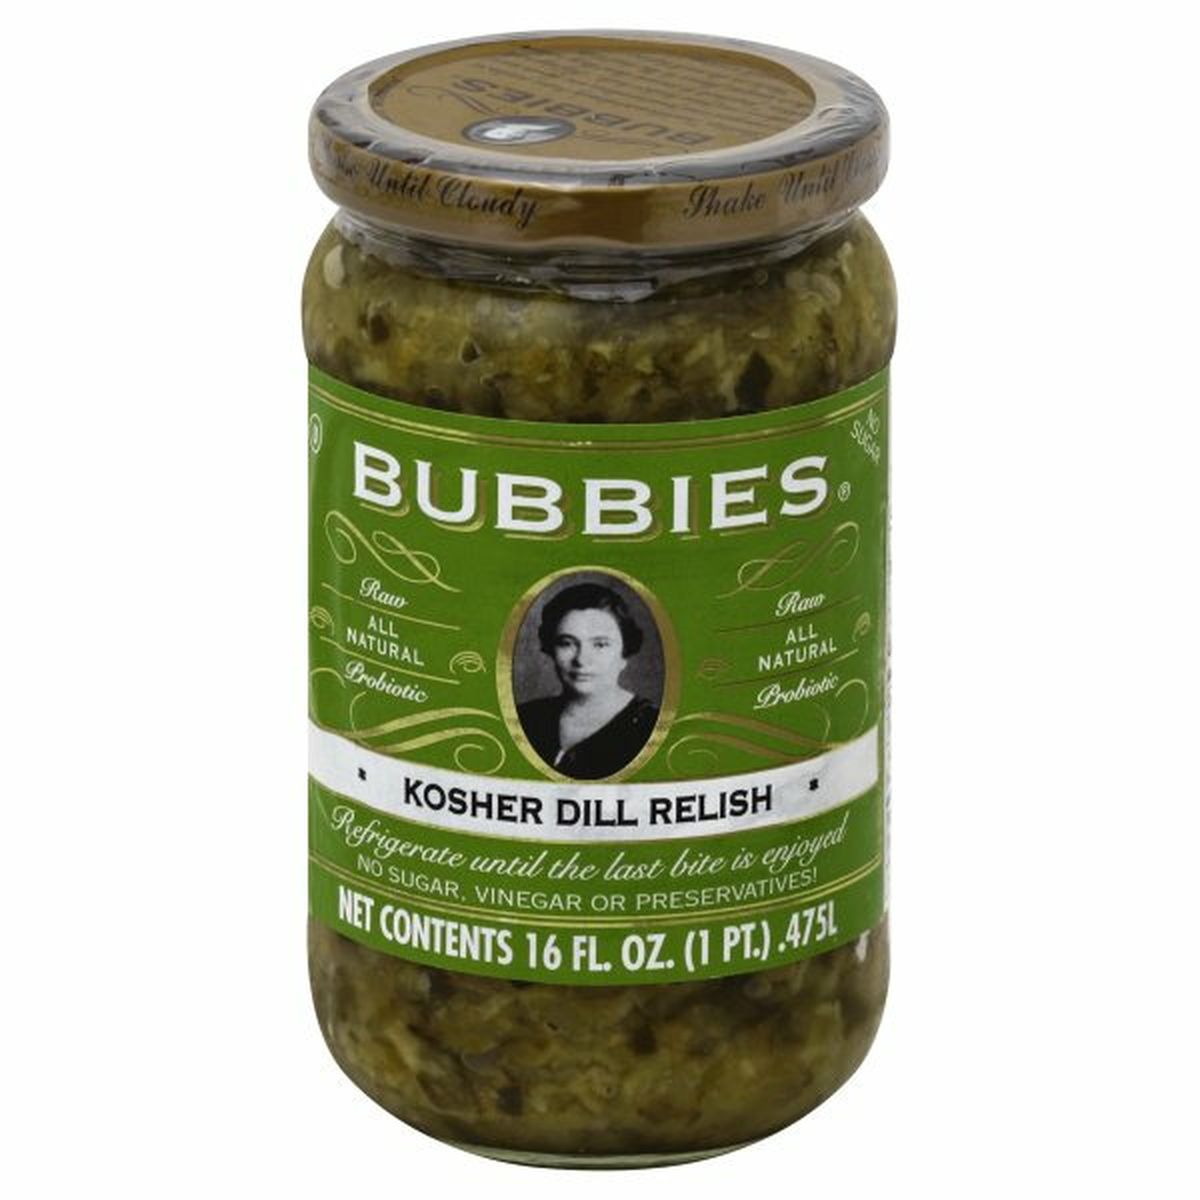 Calories in Bubbies Dill Relish, Kosher